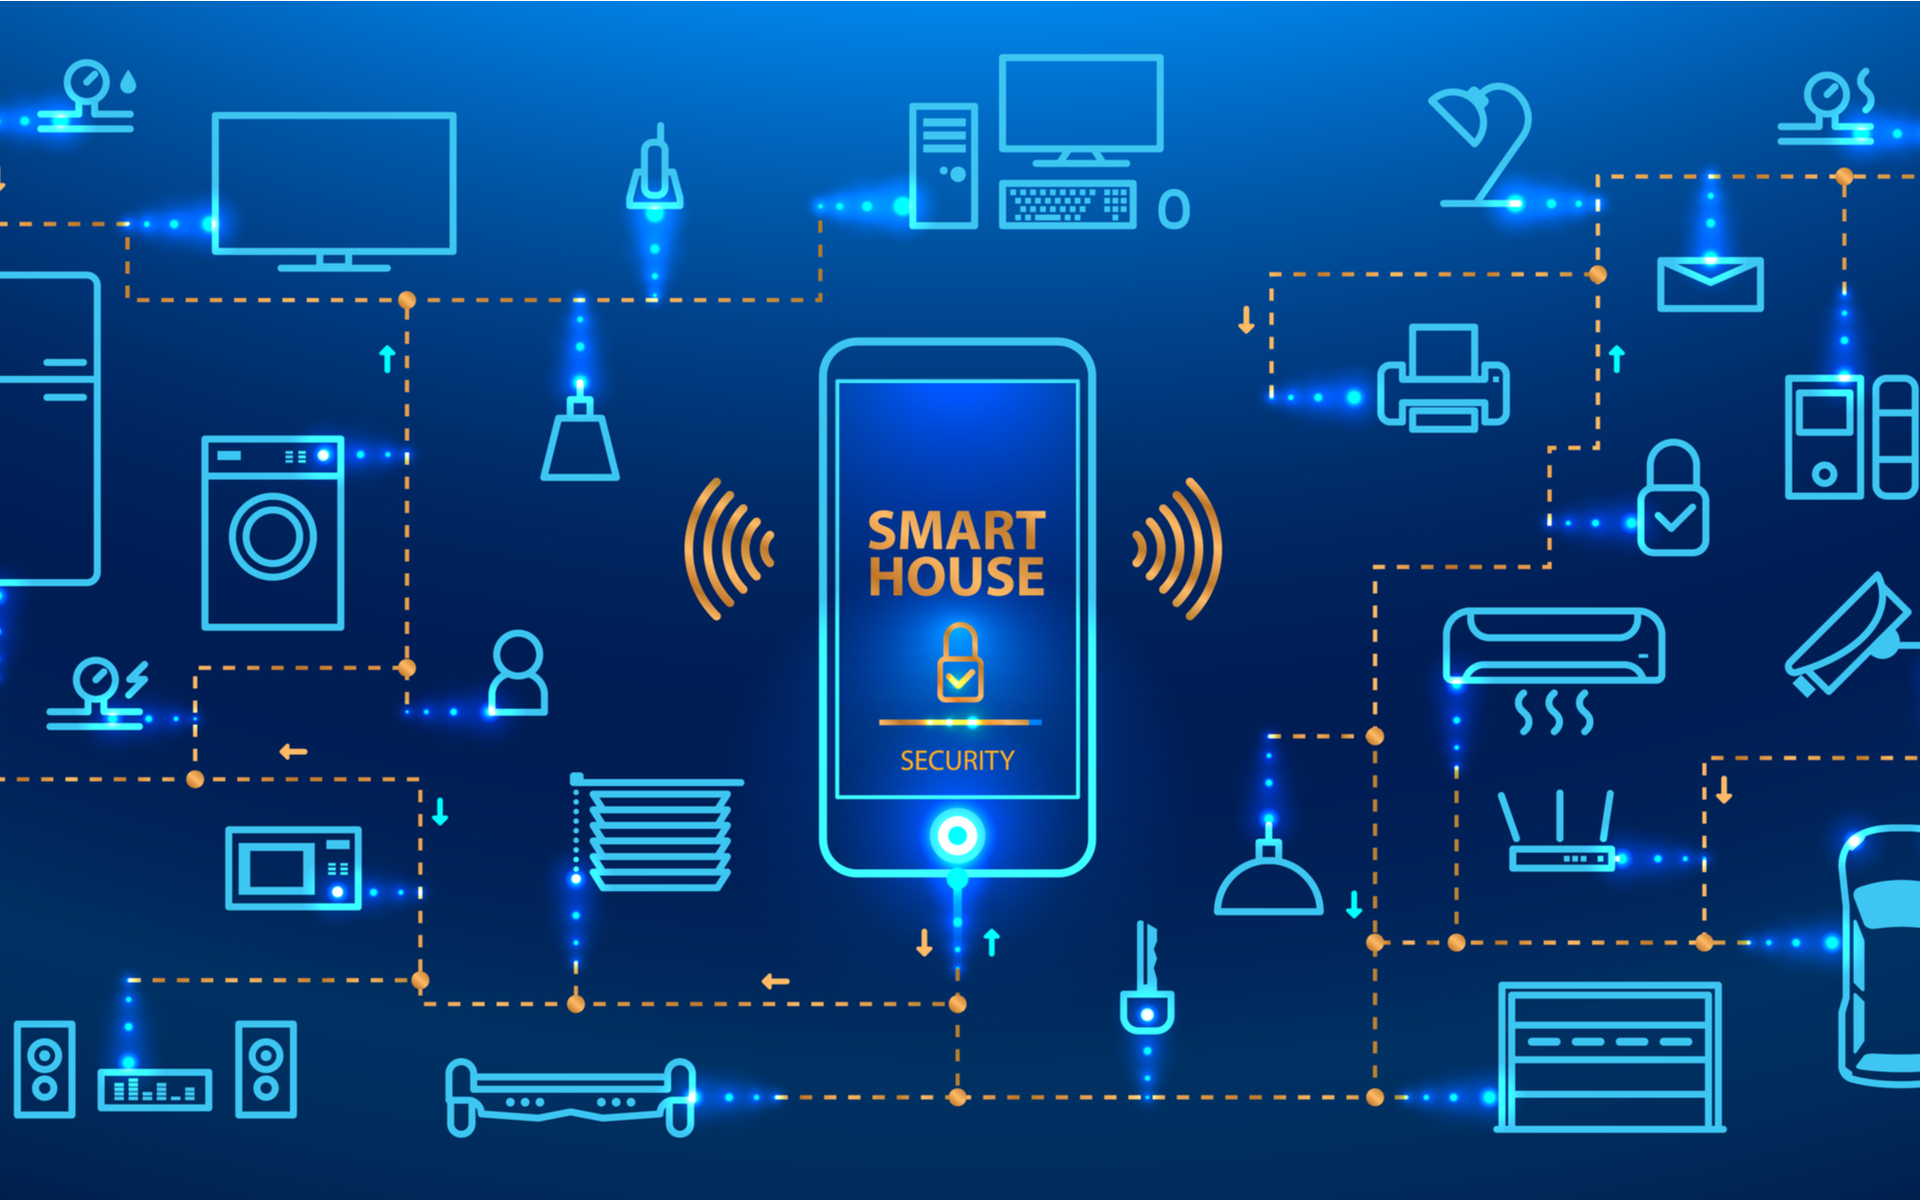 Are You Considering Building a Smart Home? Discover 3 Essential Devices to Create Your Smart House!